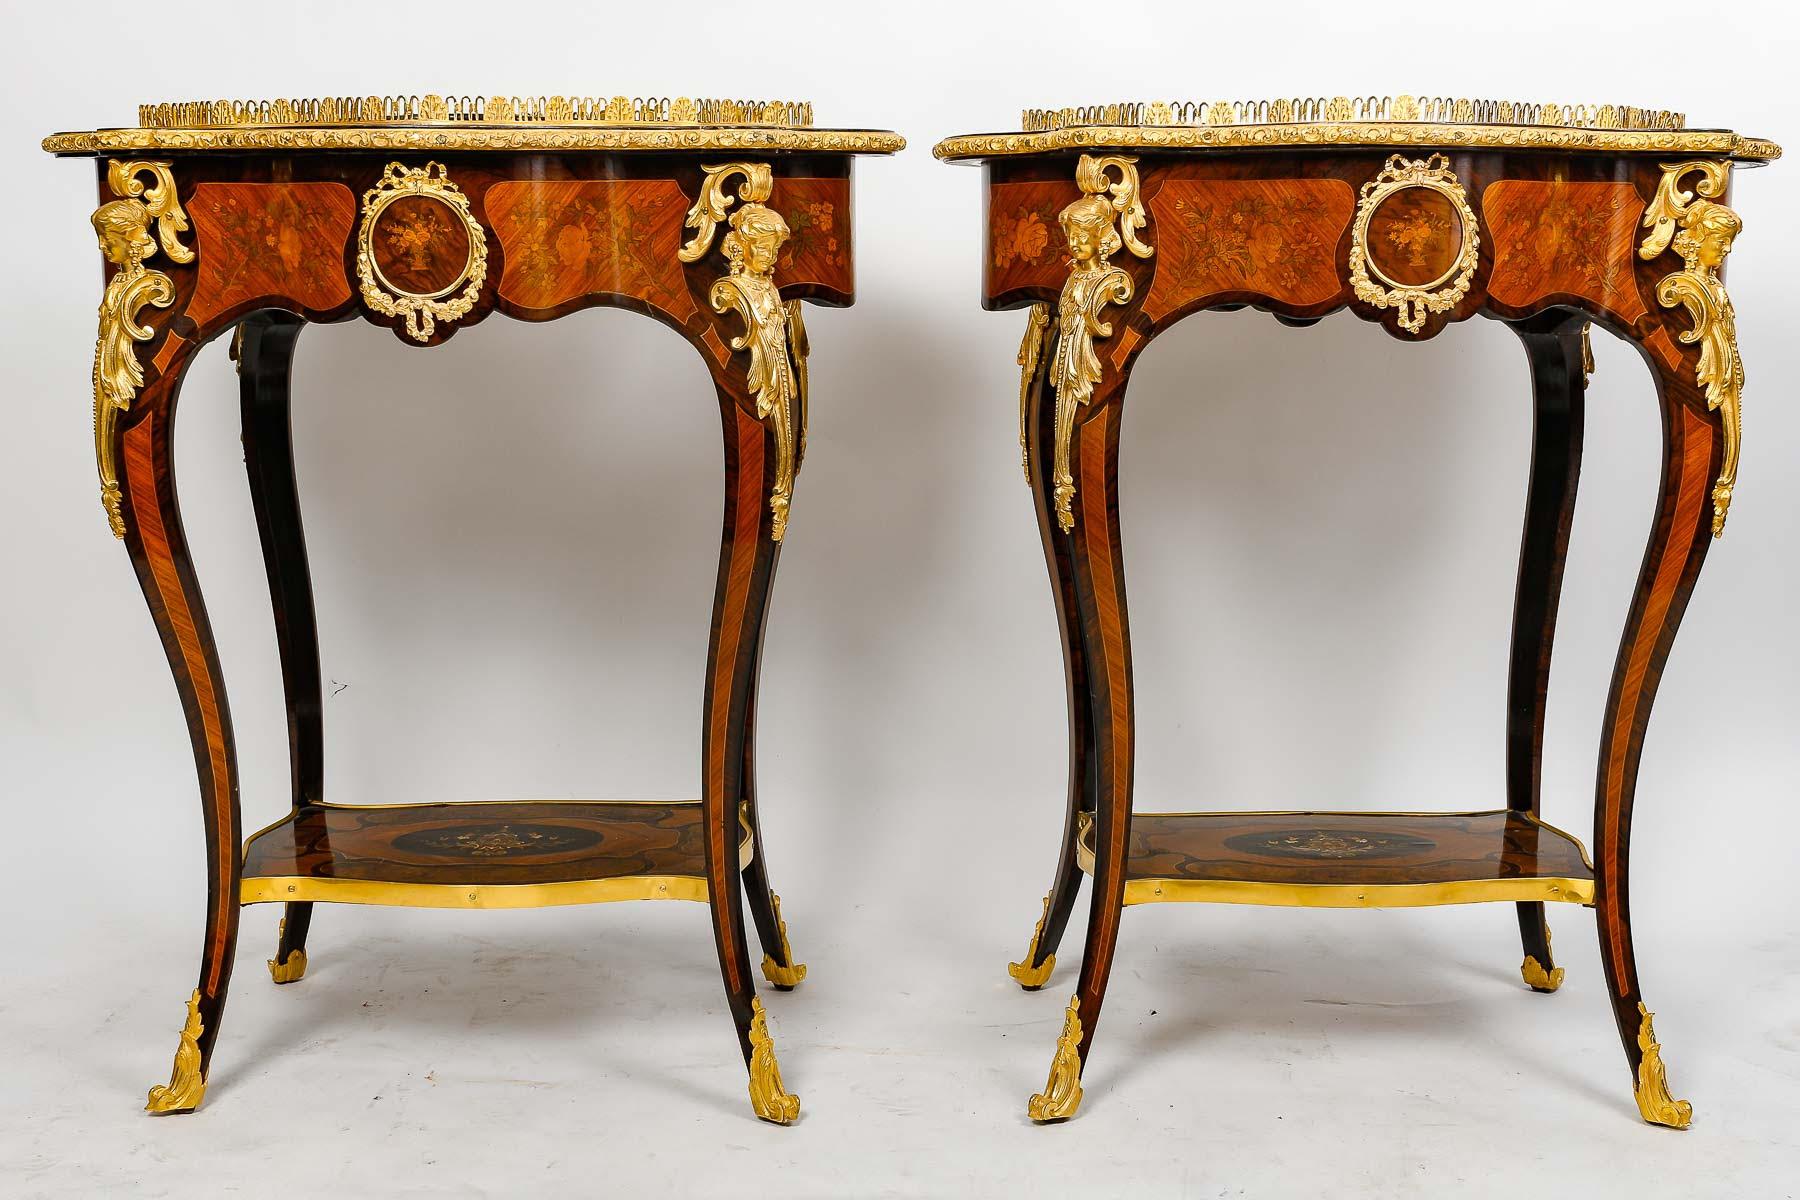 Pair of Precious Wood Marquetry and Gilt Bronze Planters, 19th Century.

A pair of Napoleon III period planters, 19th century, in precious wood marquetry and gilt bronze.
H: 84cm , W: 73cm, D: 53cm